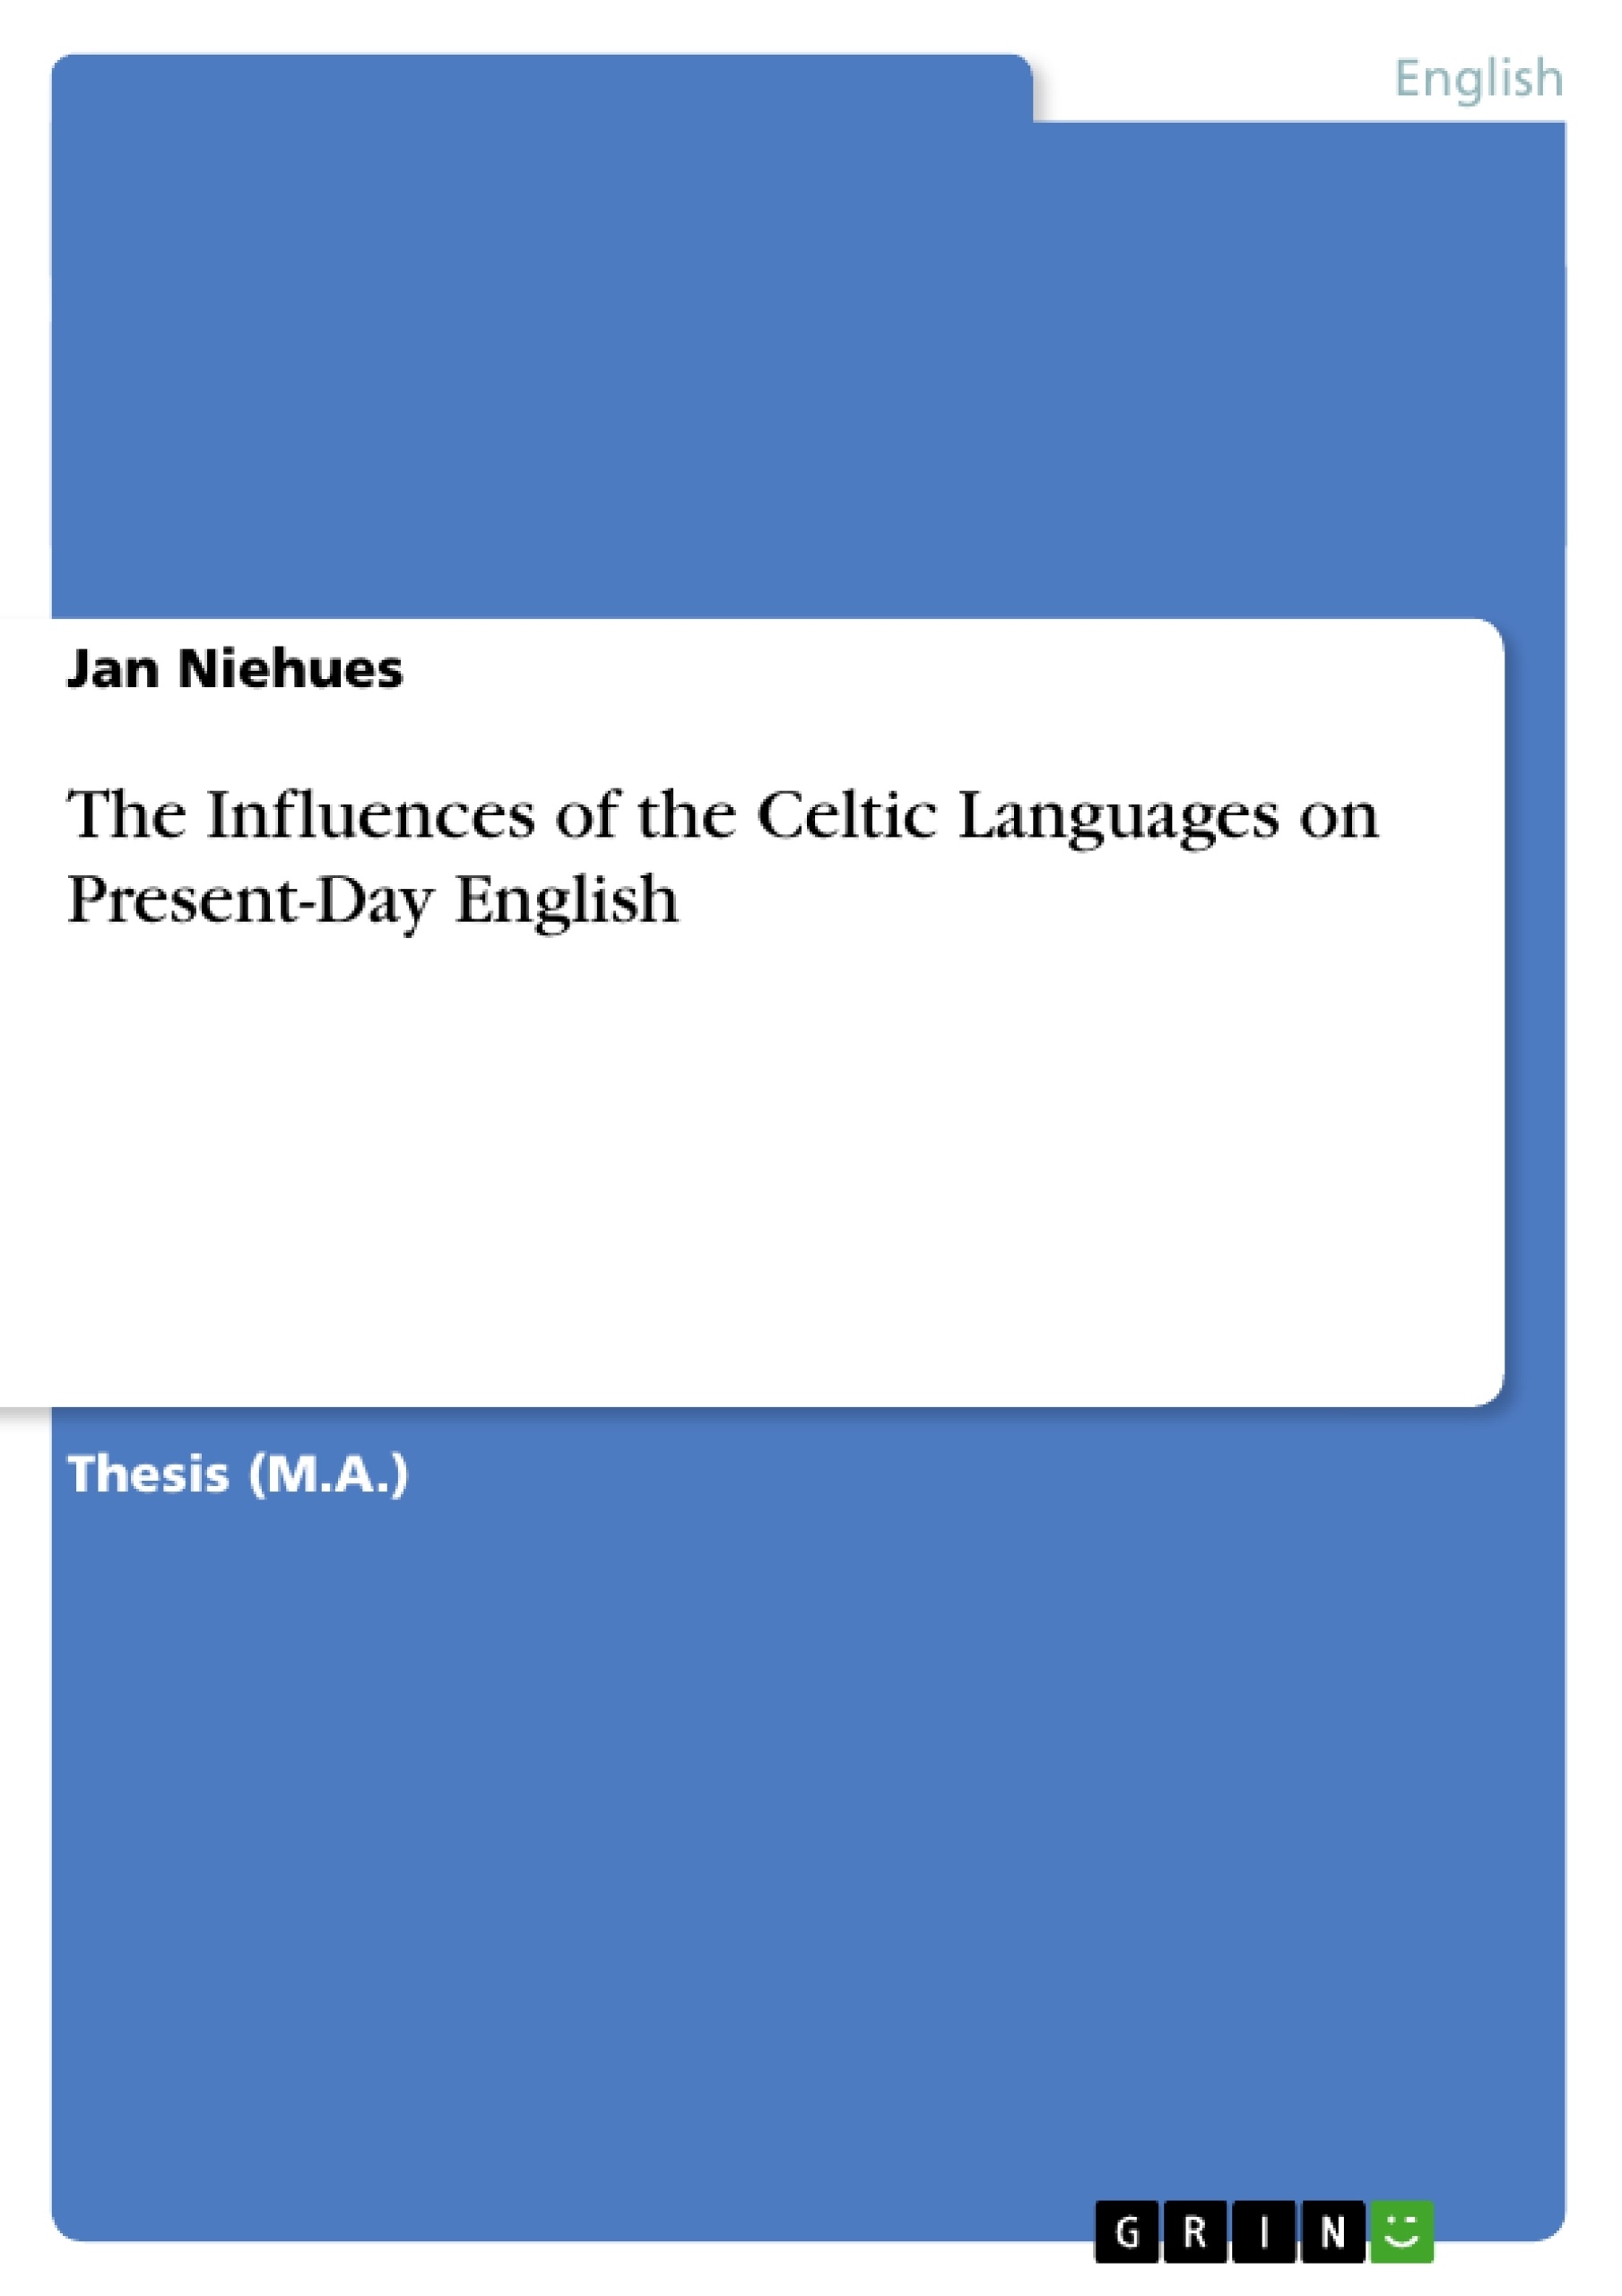 Título: The Influences of the Celtic Languages on Present-Day English